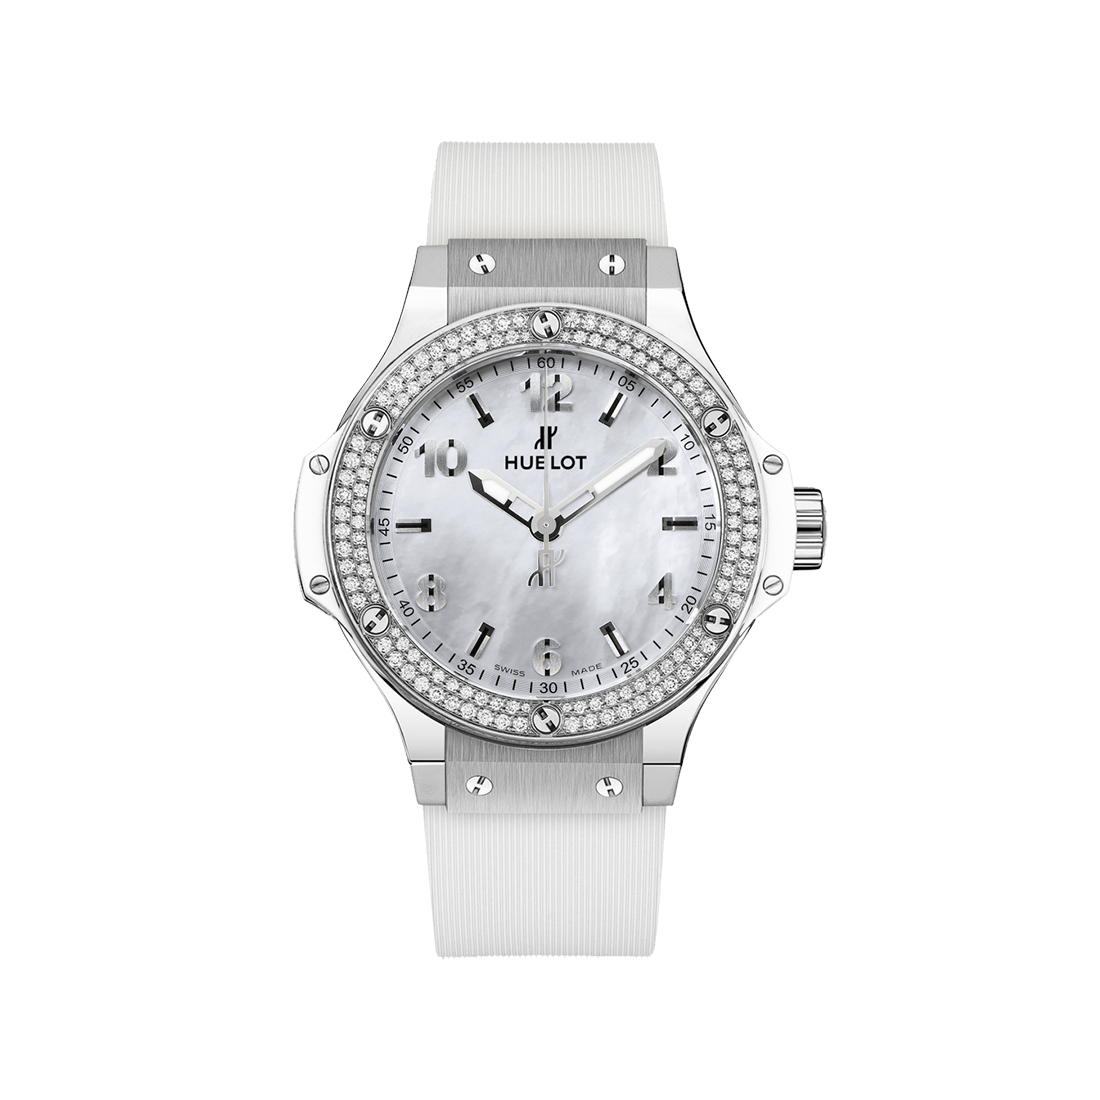 Big Bang All White Diamond Mother of Pearl 38mm (Japan Only)